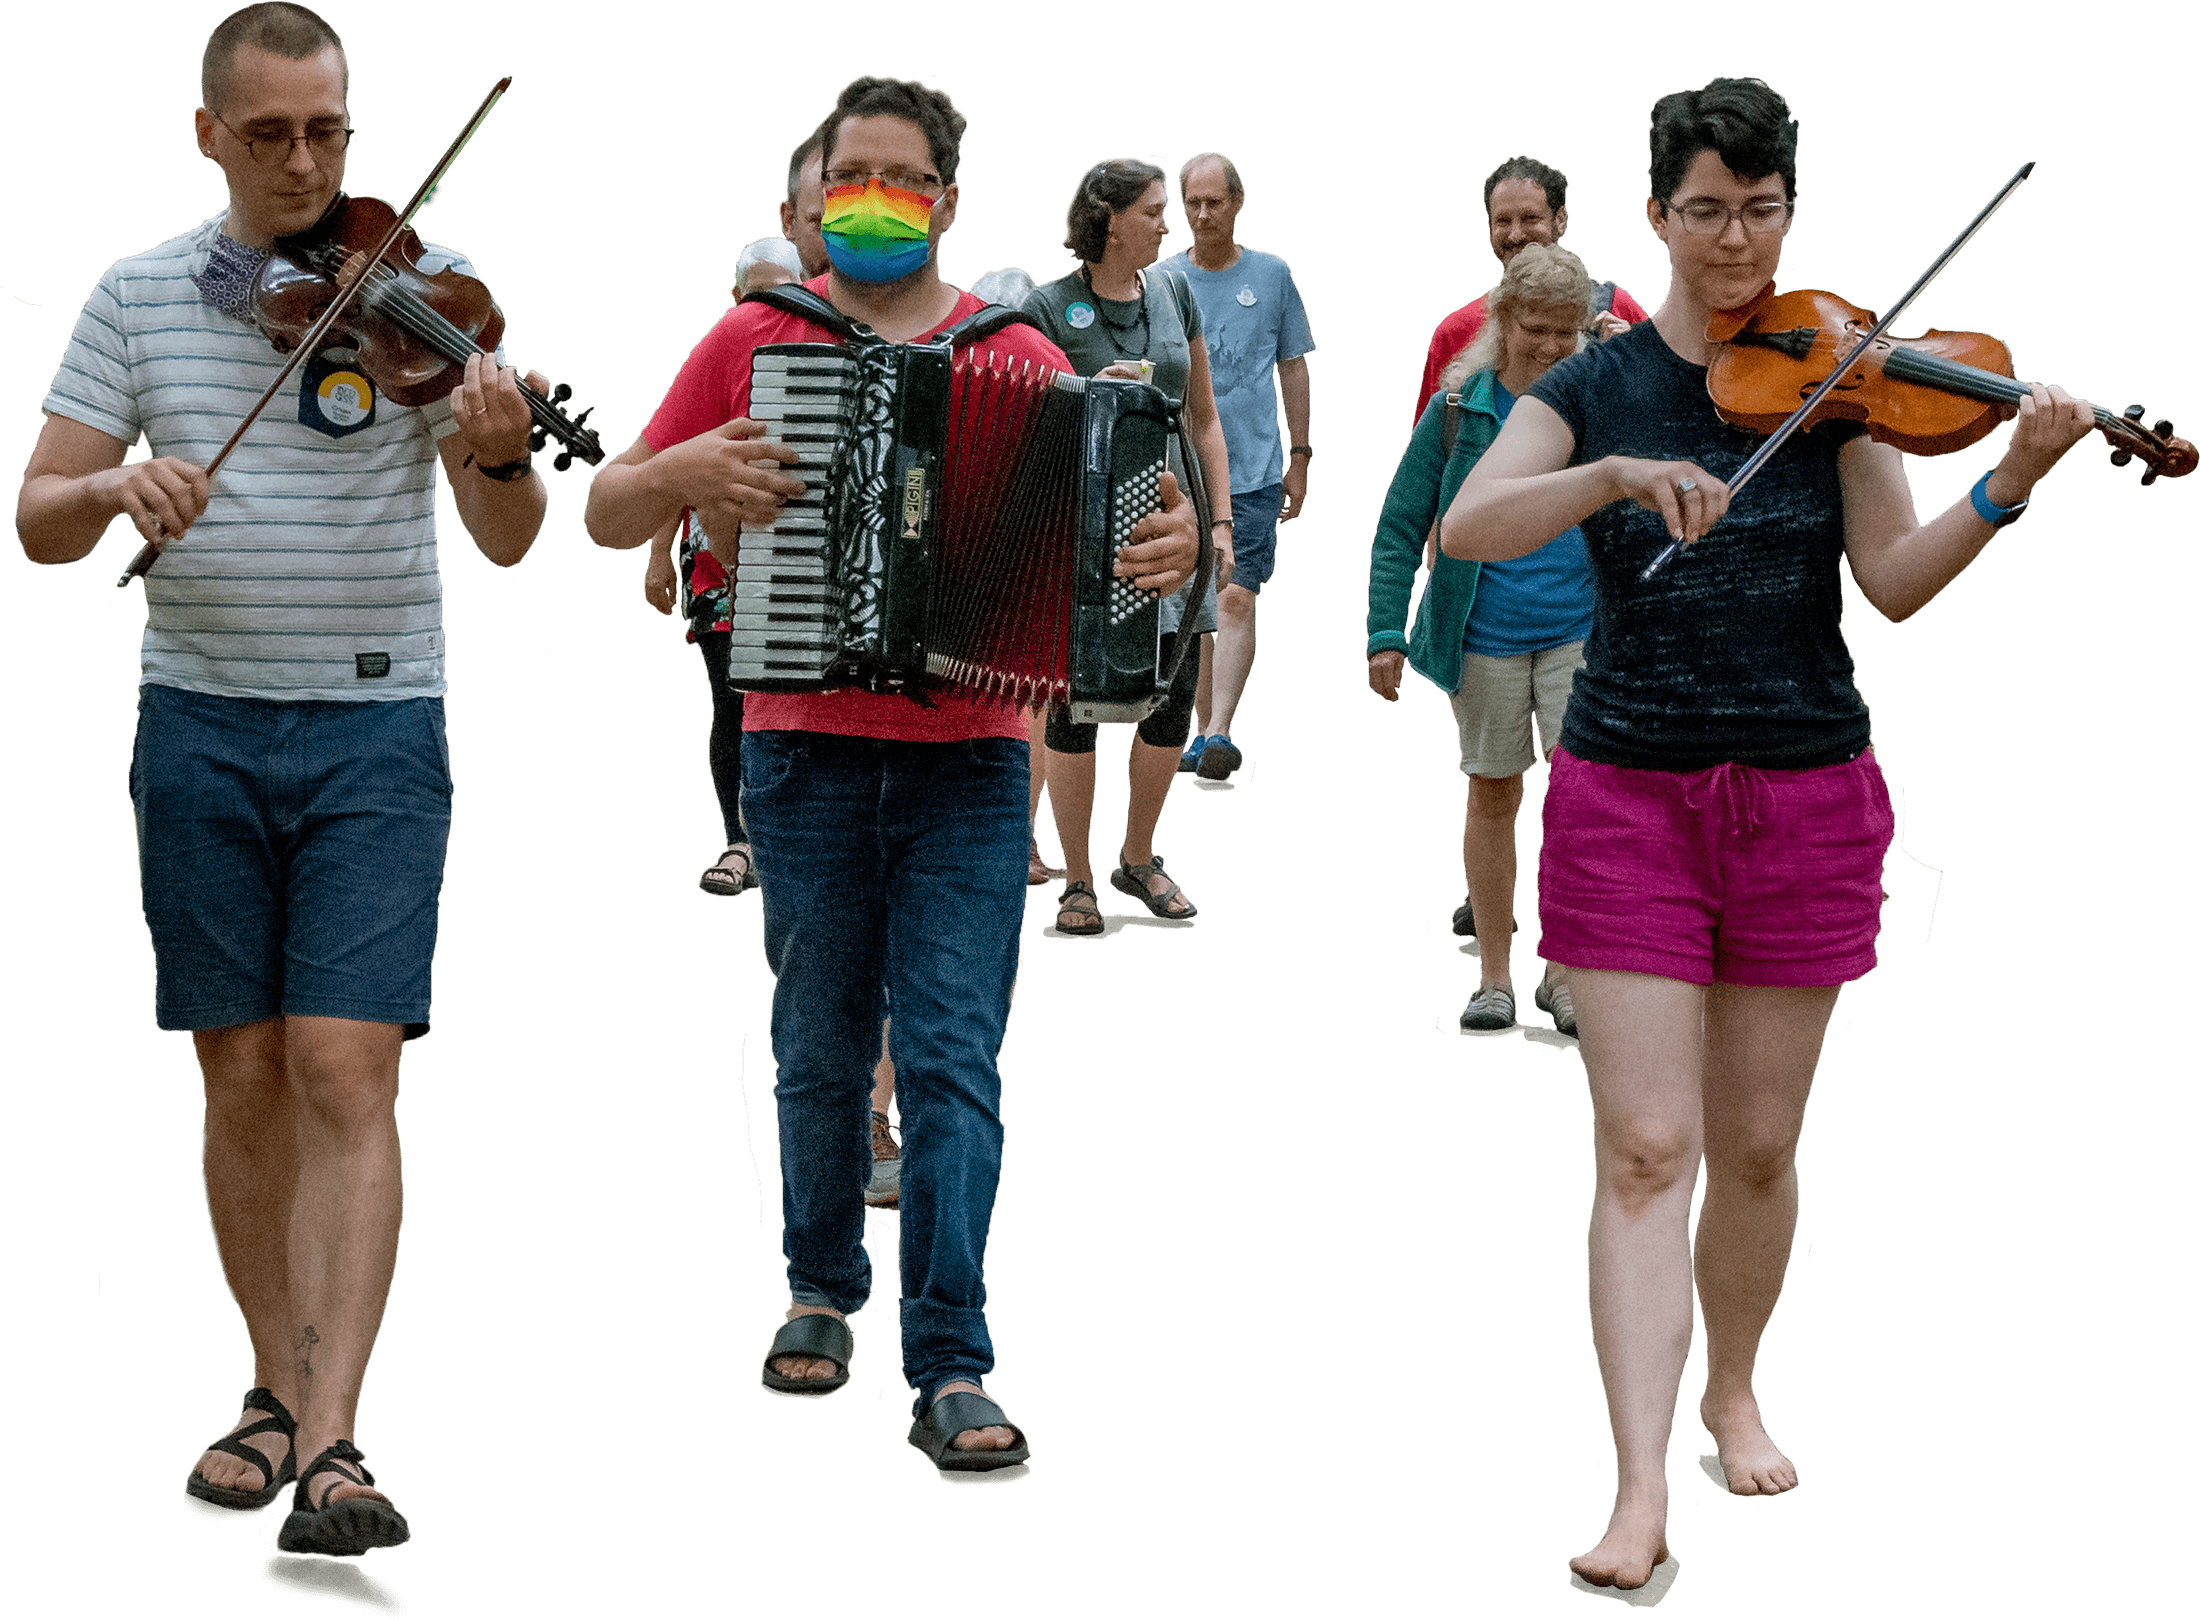 Strolling musicians at camp